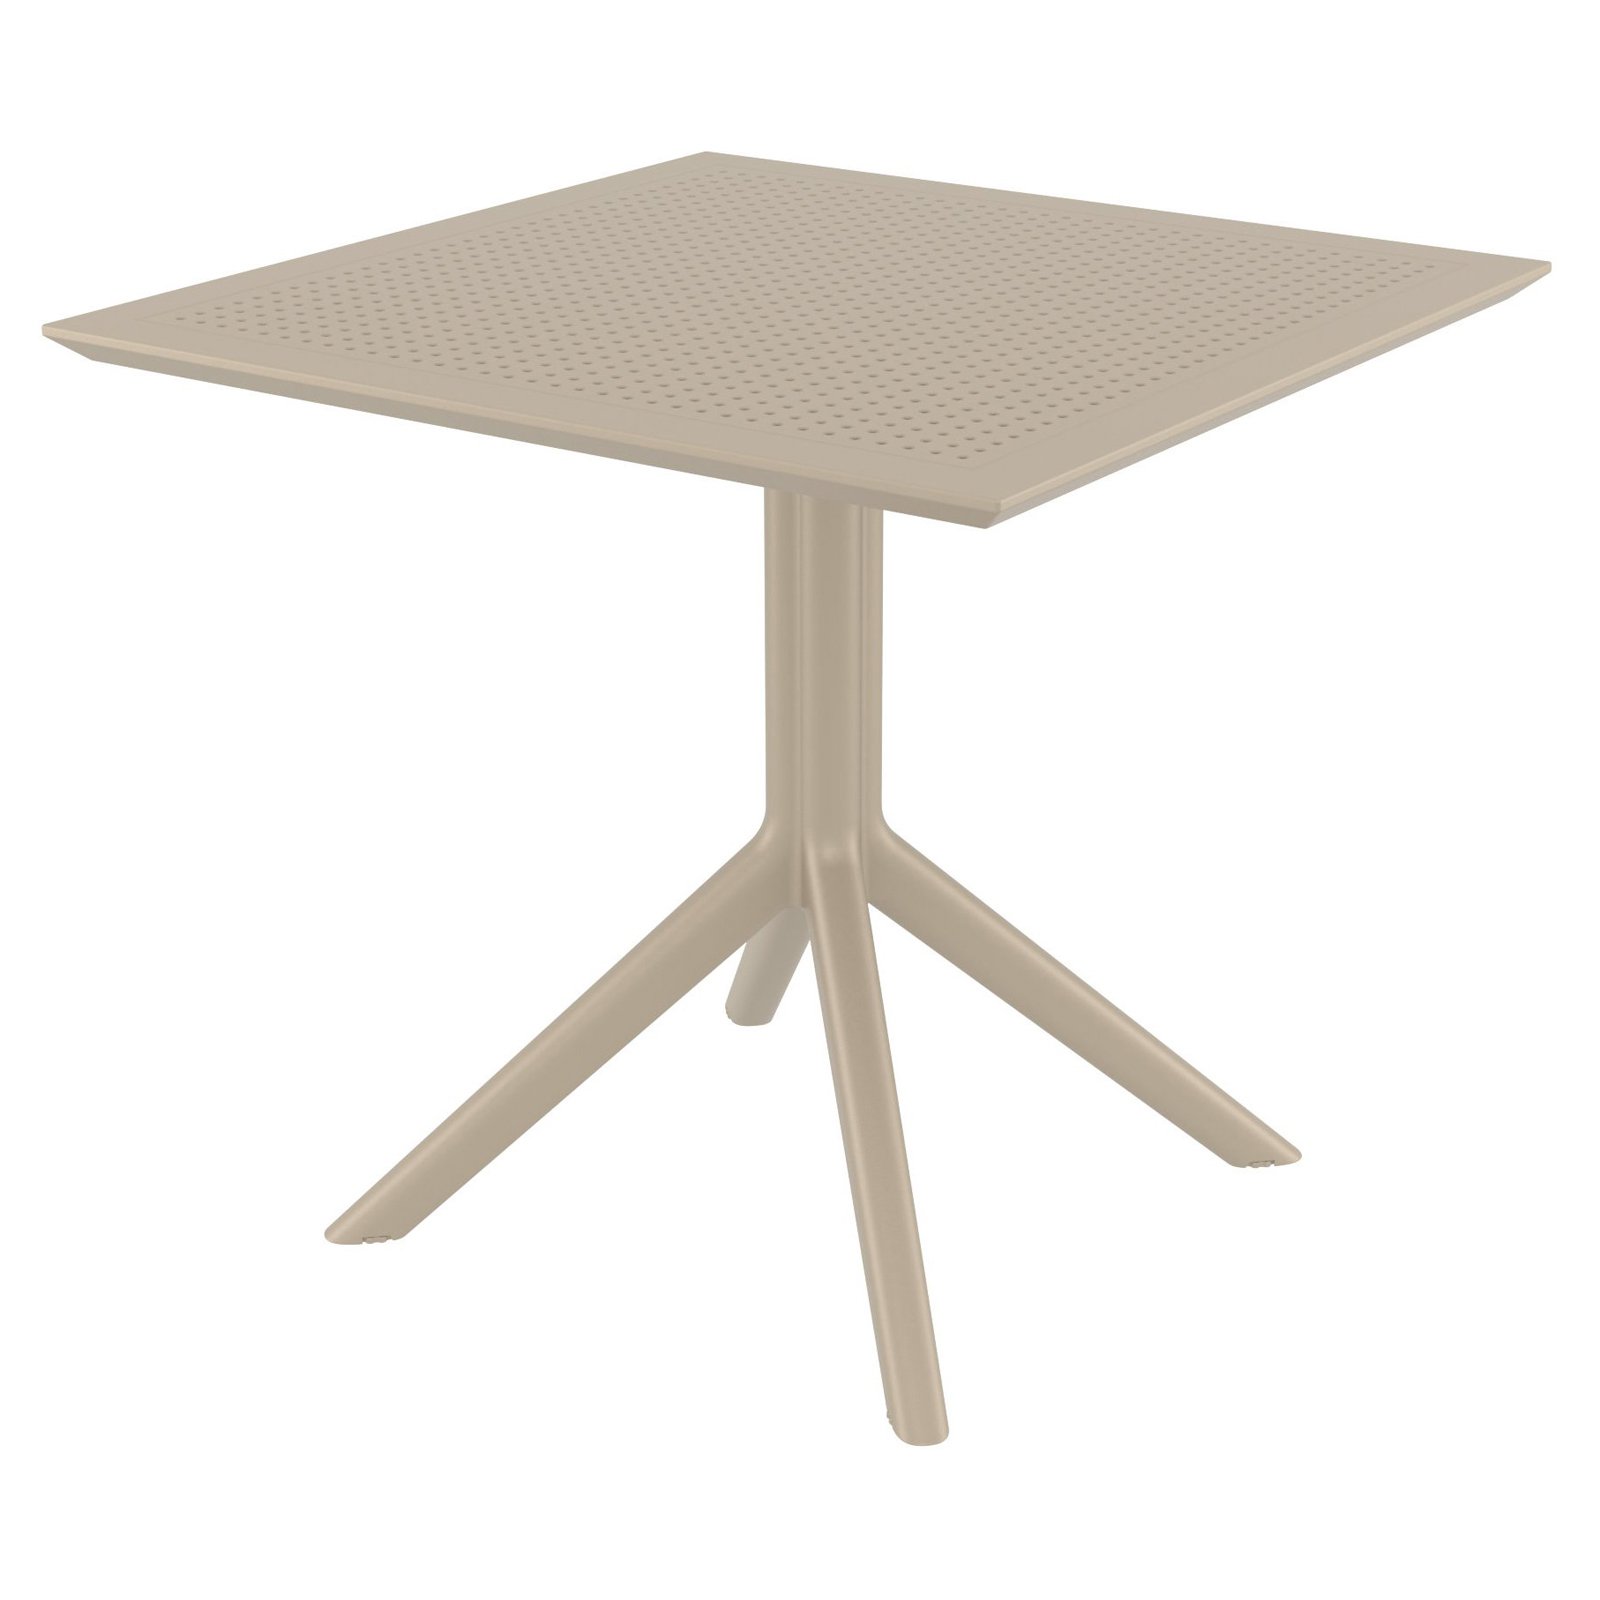 Compamia Sky 32" Square Patio Bistro Table in Taupe - image 2 of 8